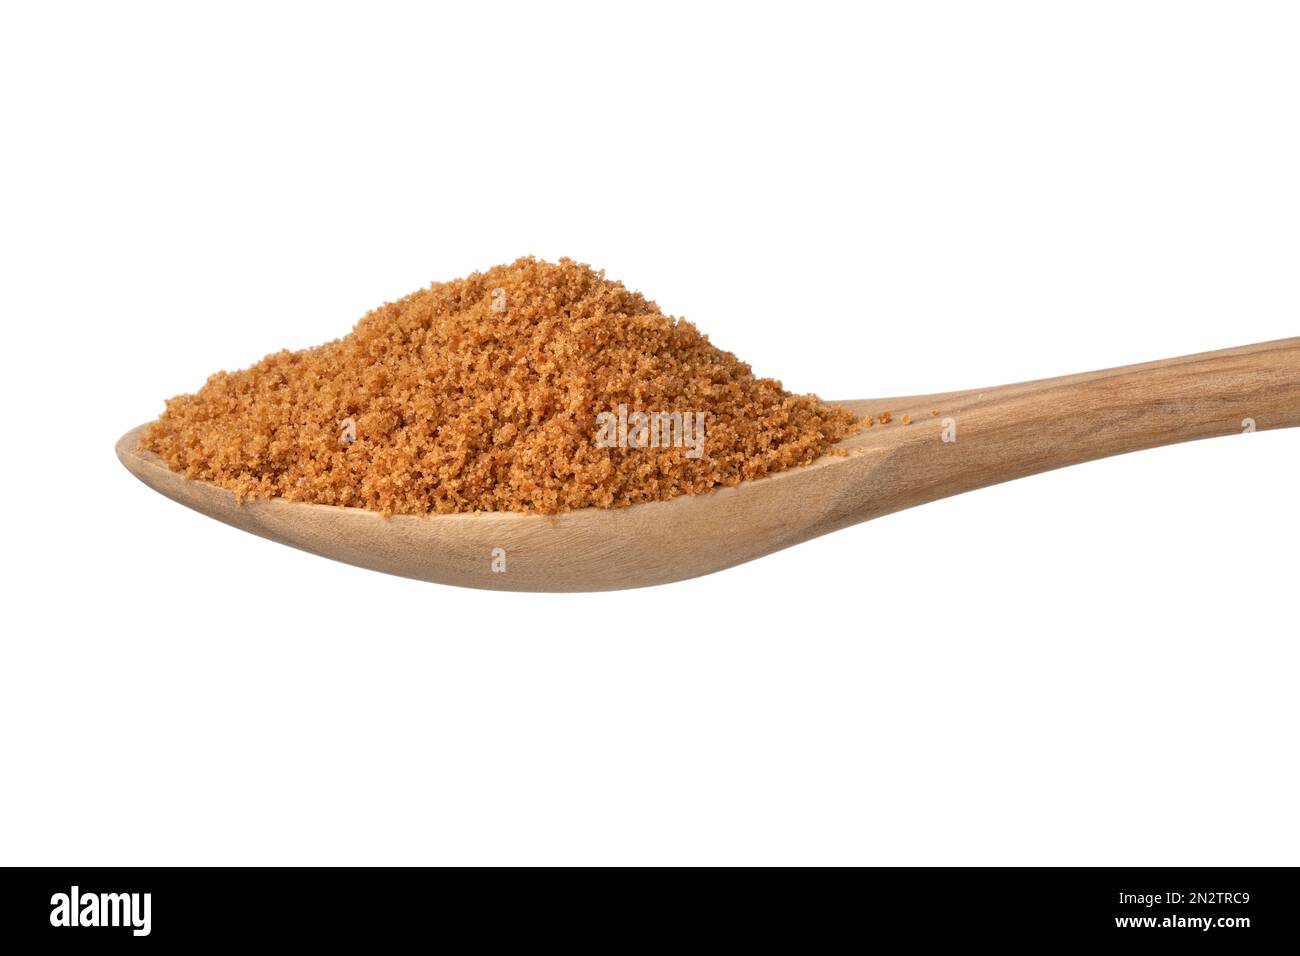 Golden palm sugar on a wooden spoon on white background close up Stock Photo